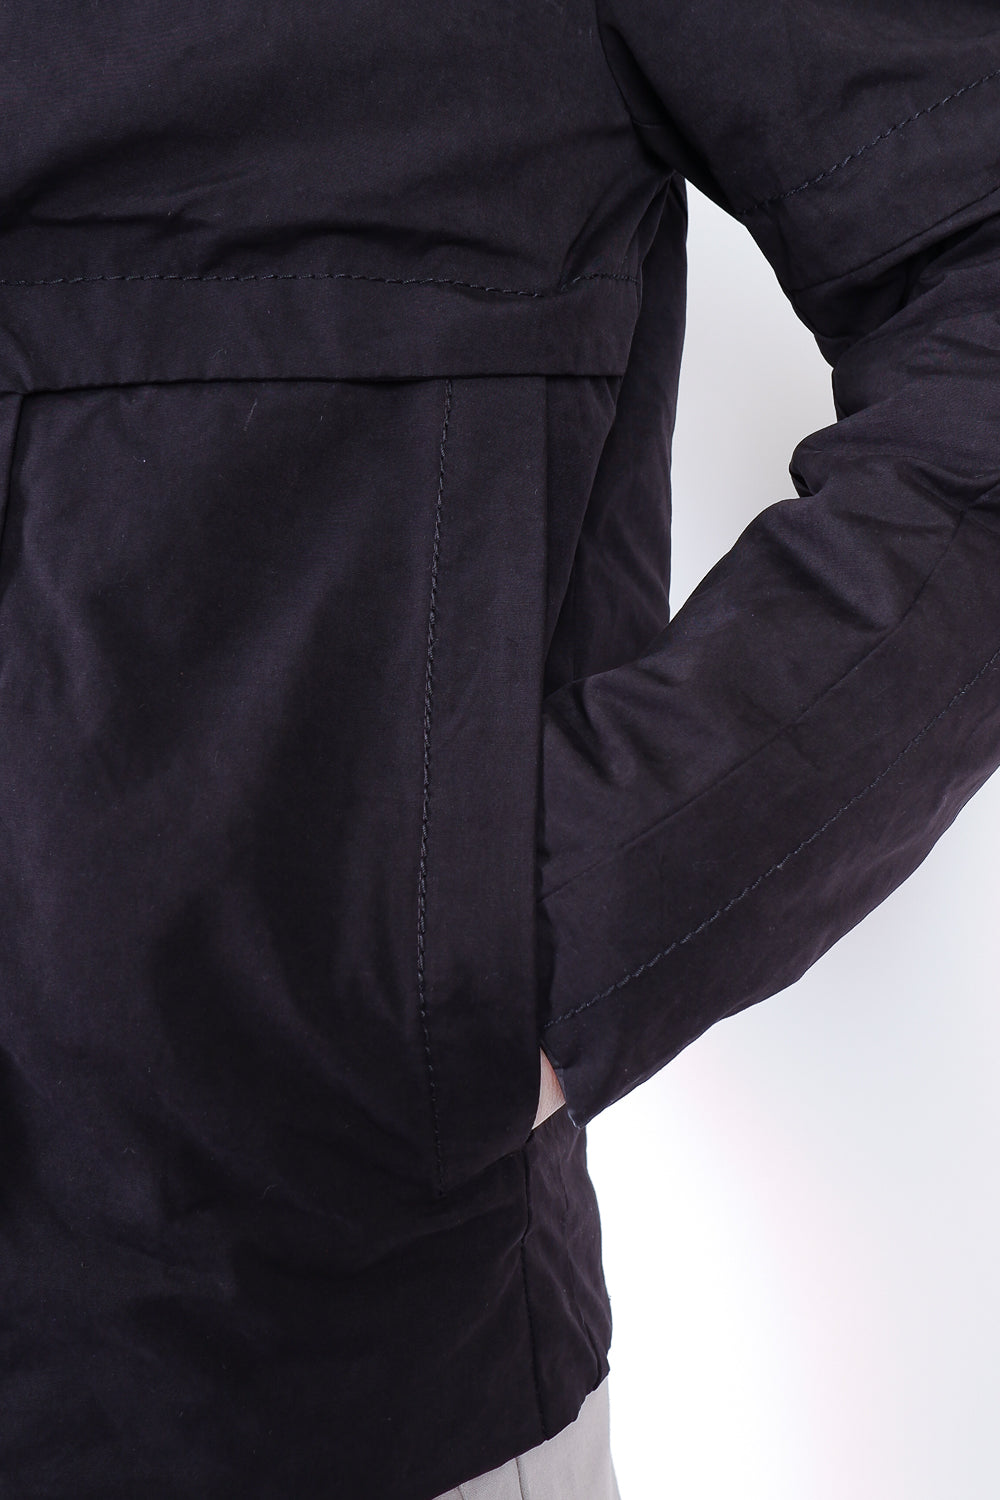 Buy the Transit Reversible Water-Repellent Cotton Jacket in Black at Intro. Spend £50 for free UK delivery. Official stockists. We ship worldwide.